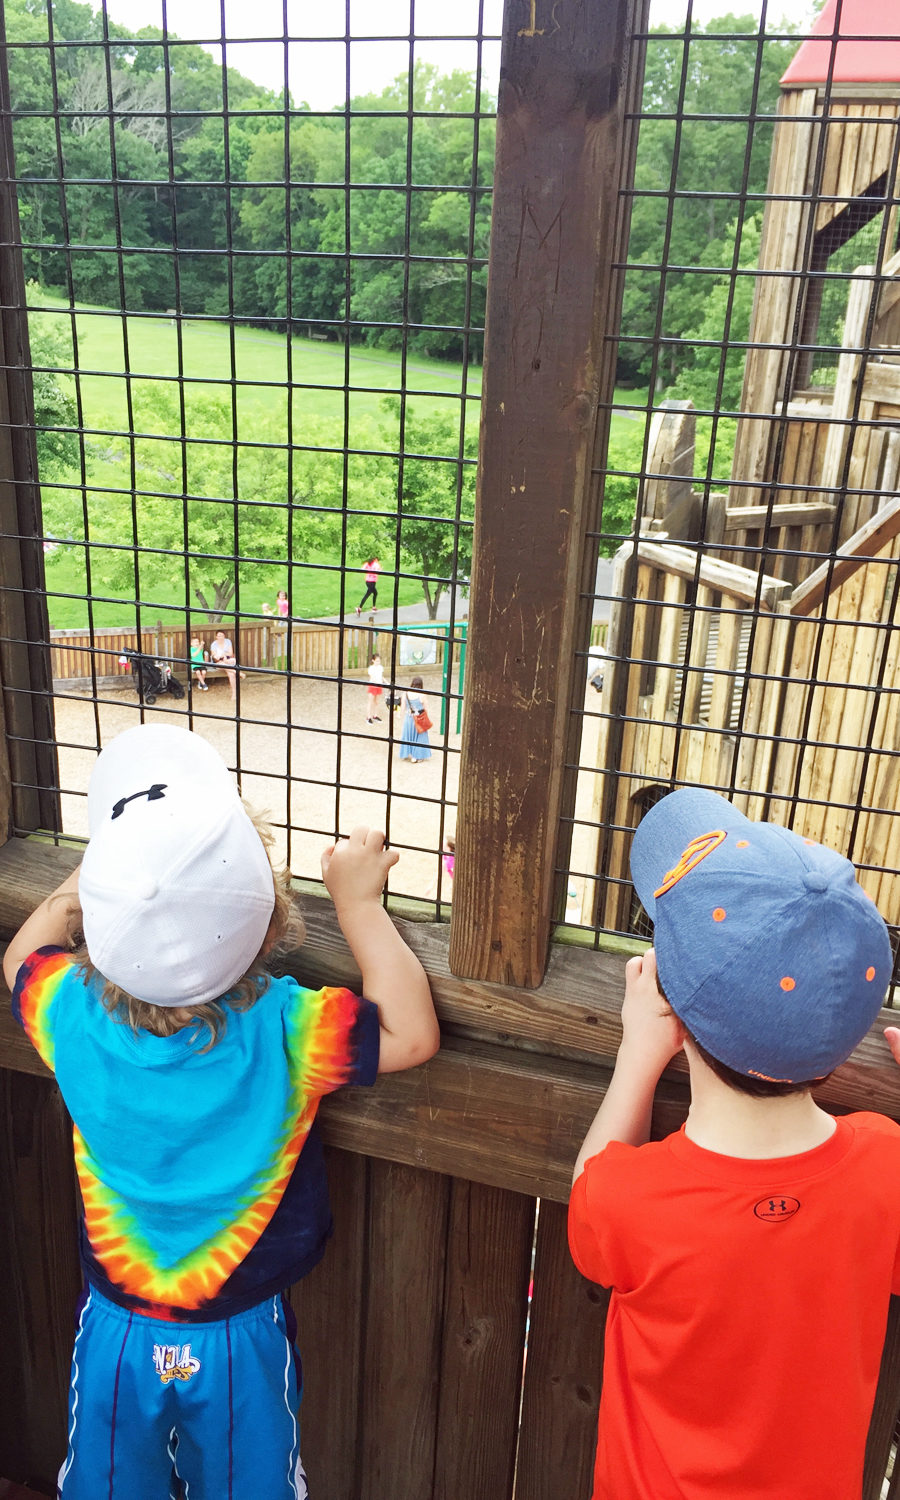 Checking out the view at Kid's Castle Playground in Doylestown, PA